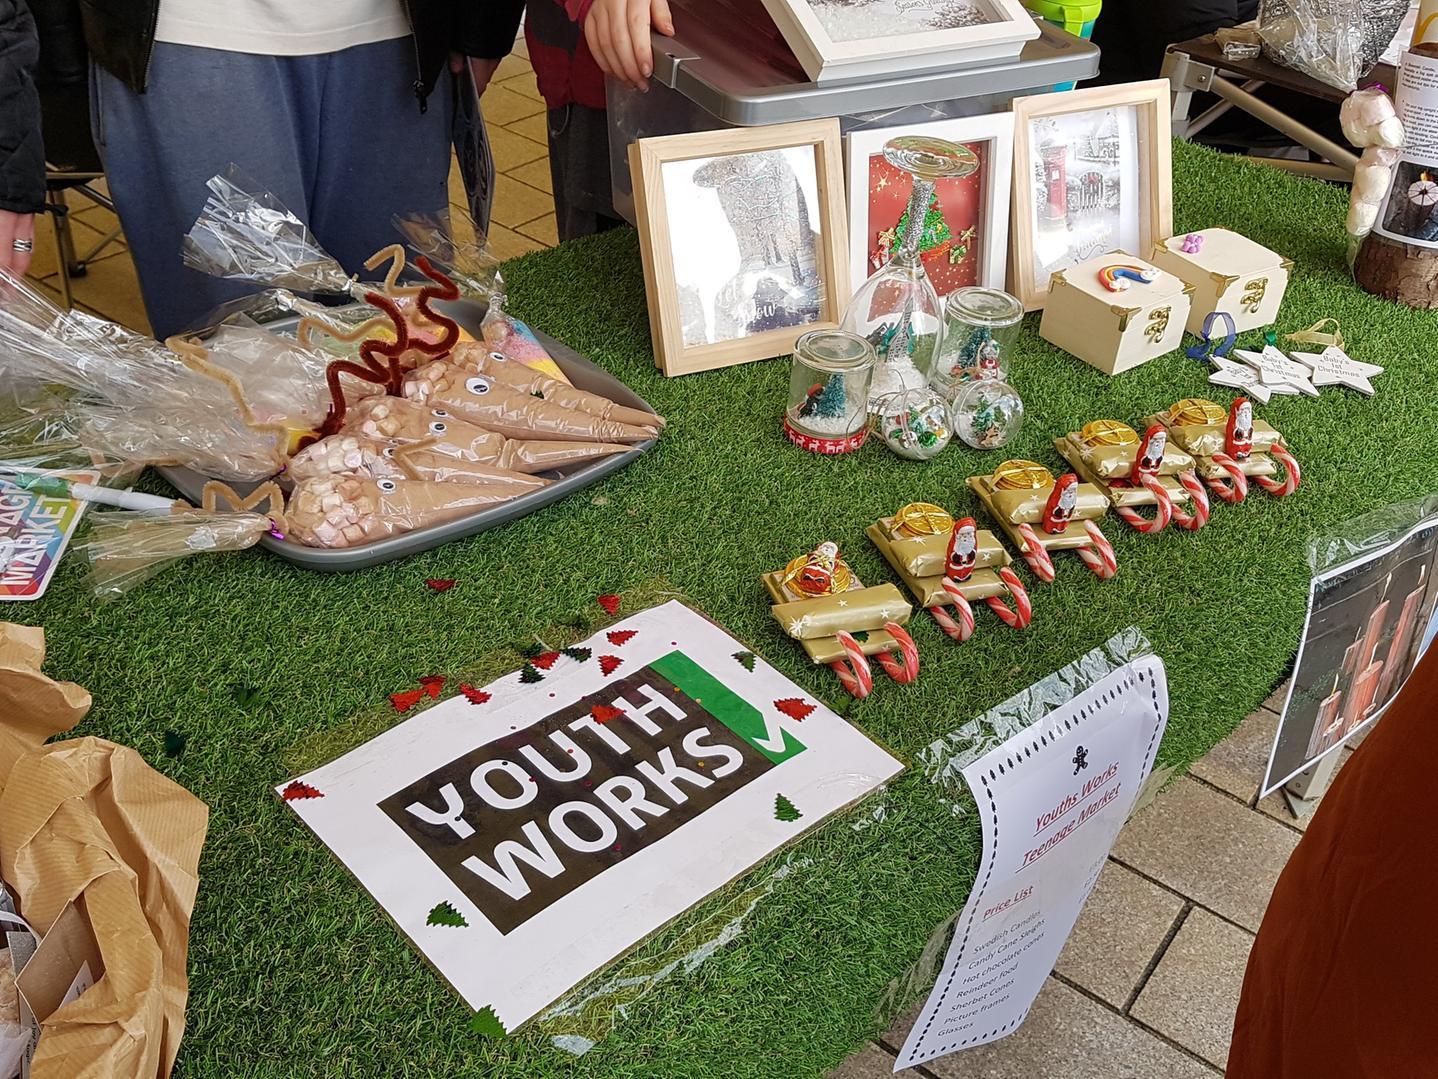 Local organisation Youth Works, which delivers education and support for young people in the county, had a stall with handmade goods. Lorraine Nicholls, who works for Youth Works, said all the items had been made by young people working towards a City and Guilds qualification.